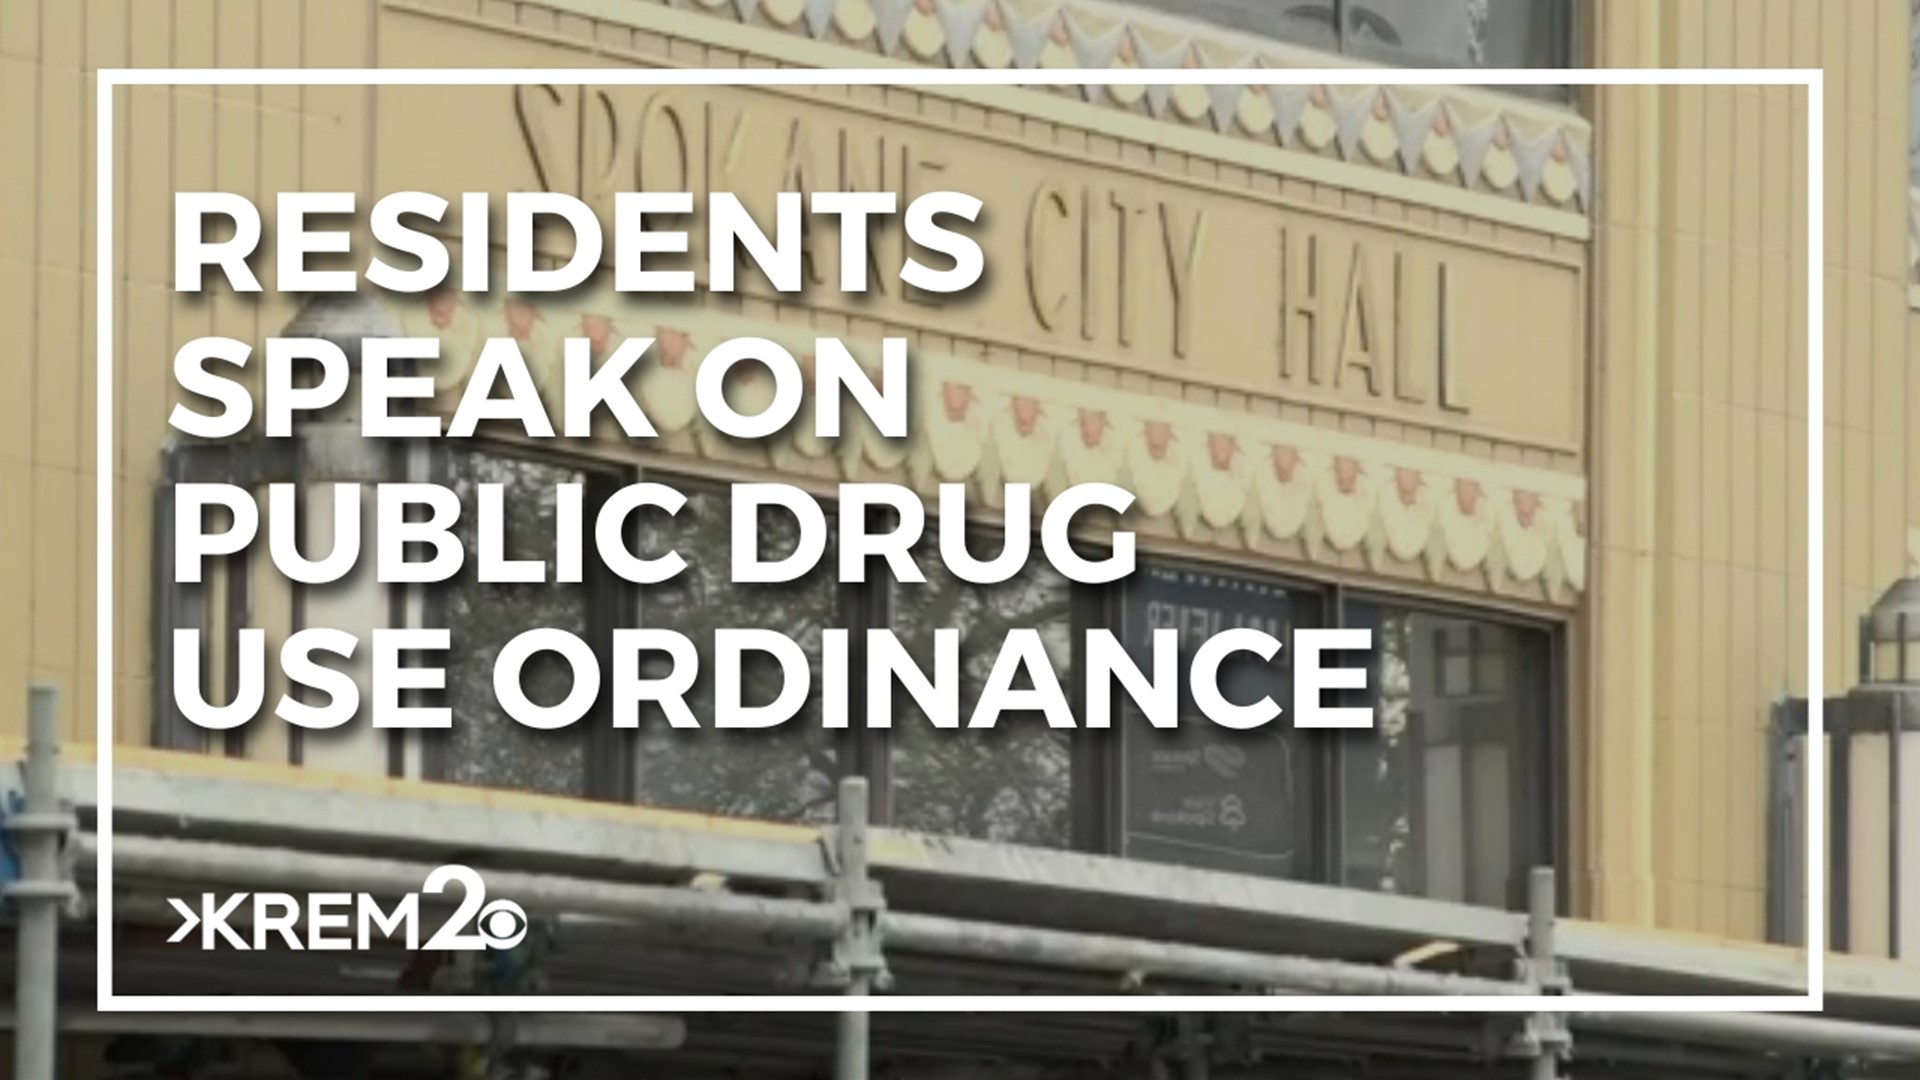 If the ordinance passes tonight, it will go into effect immediately.